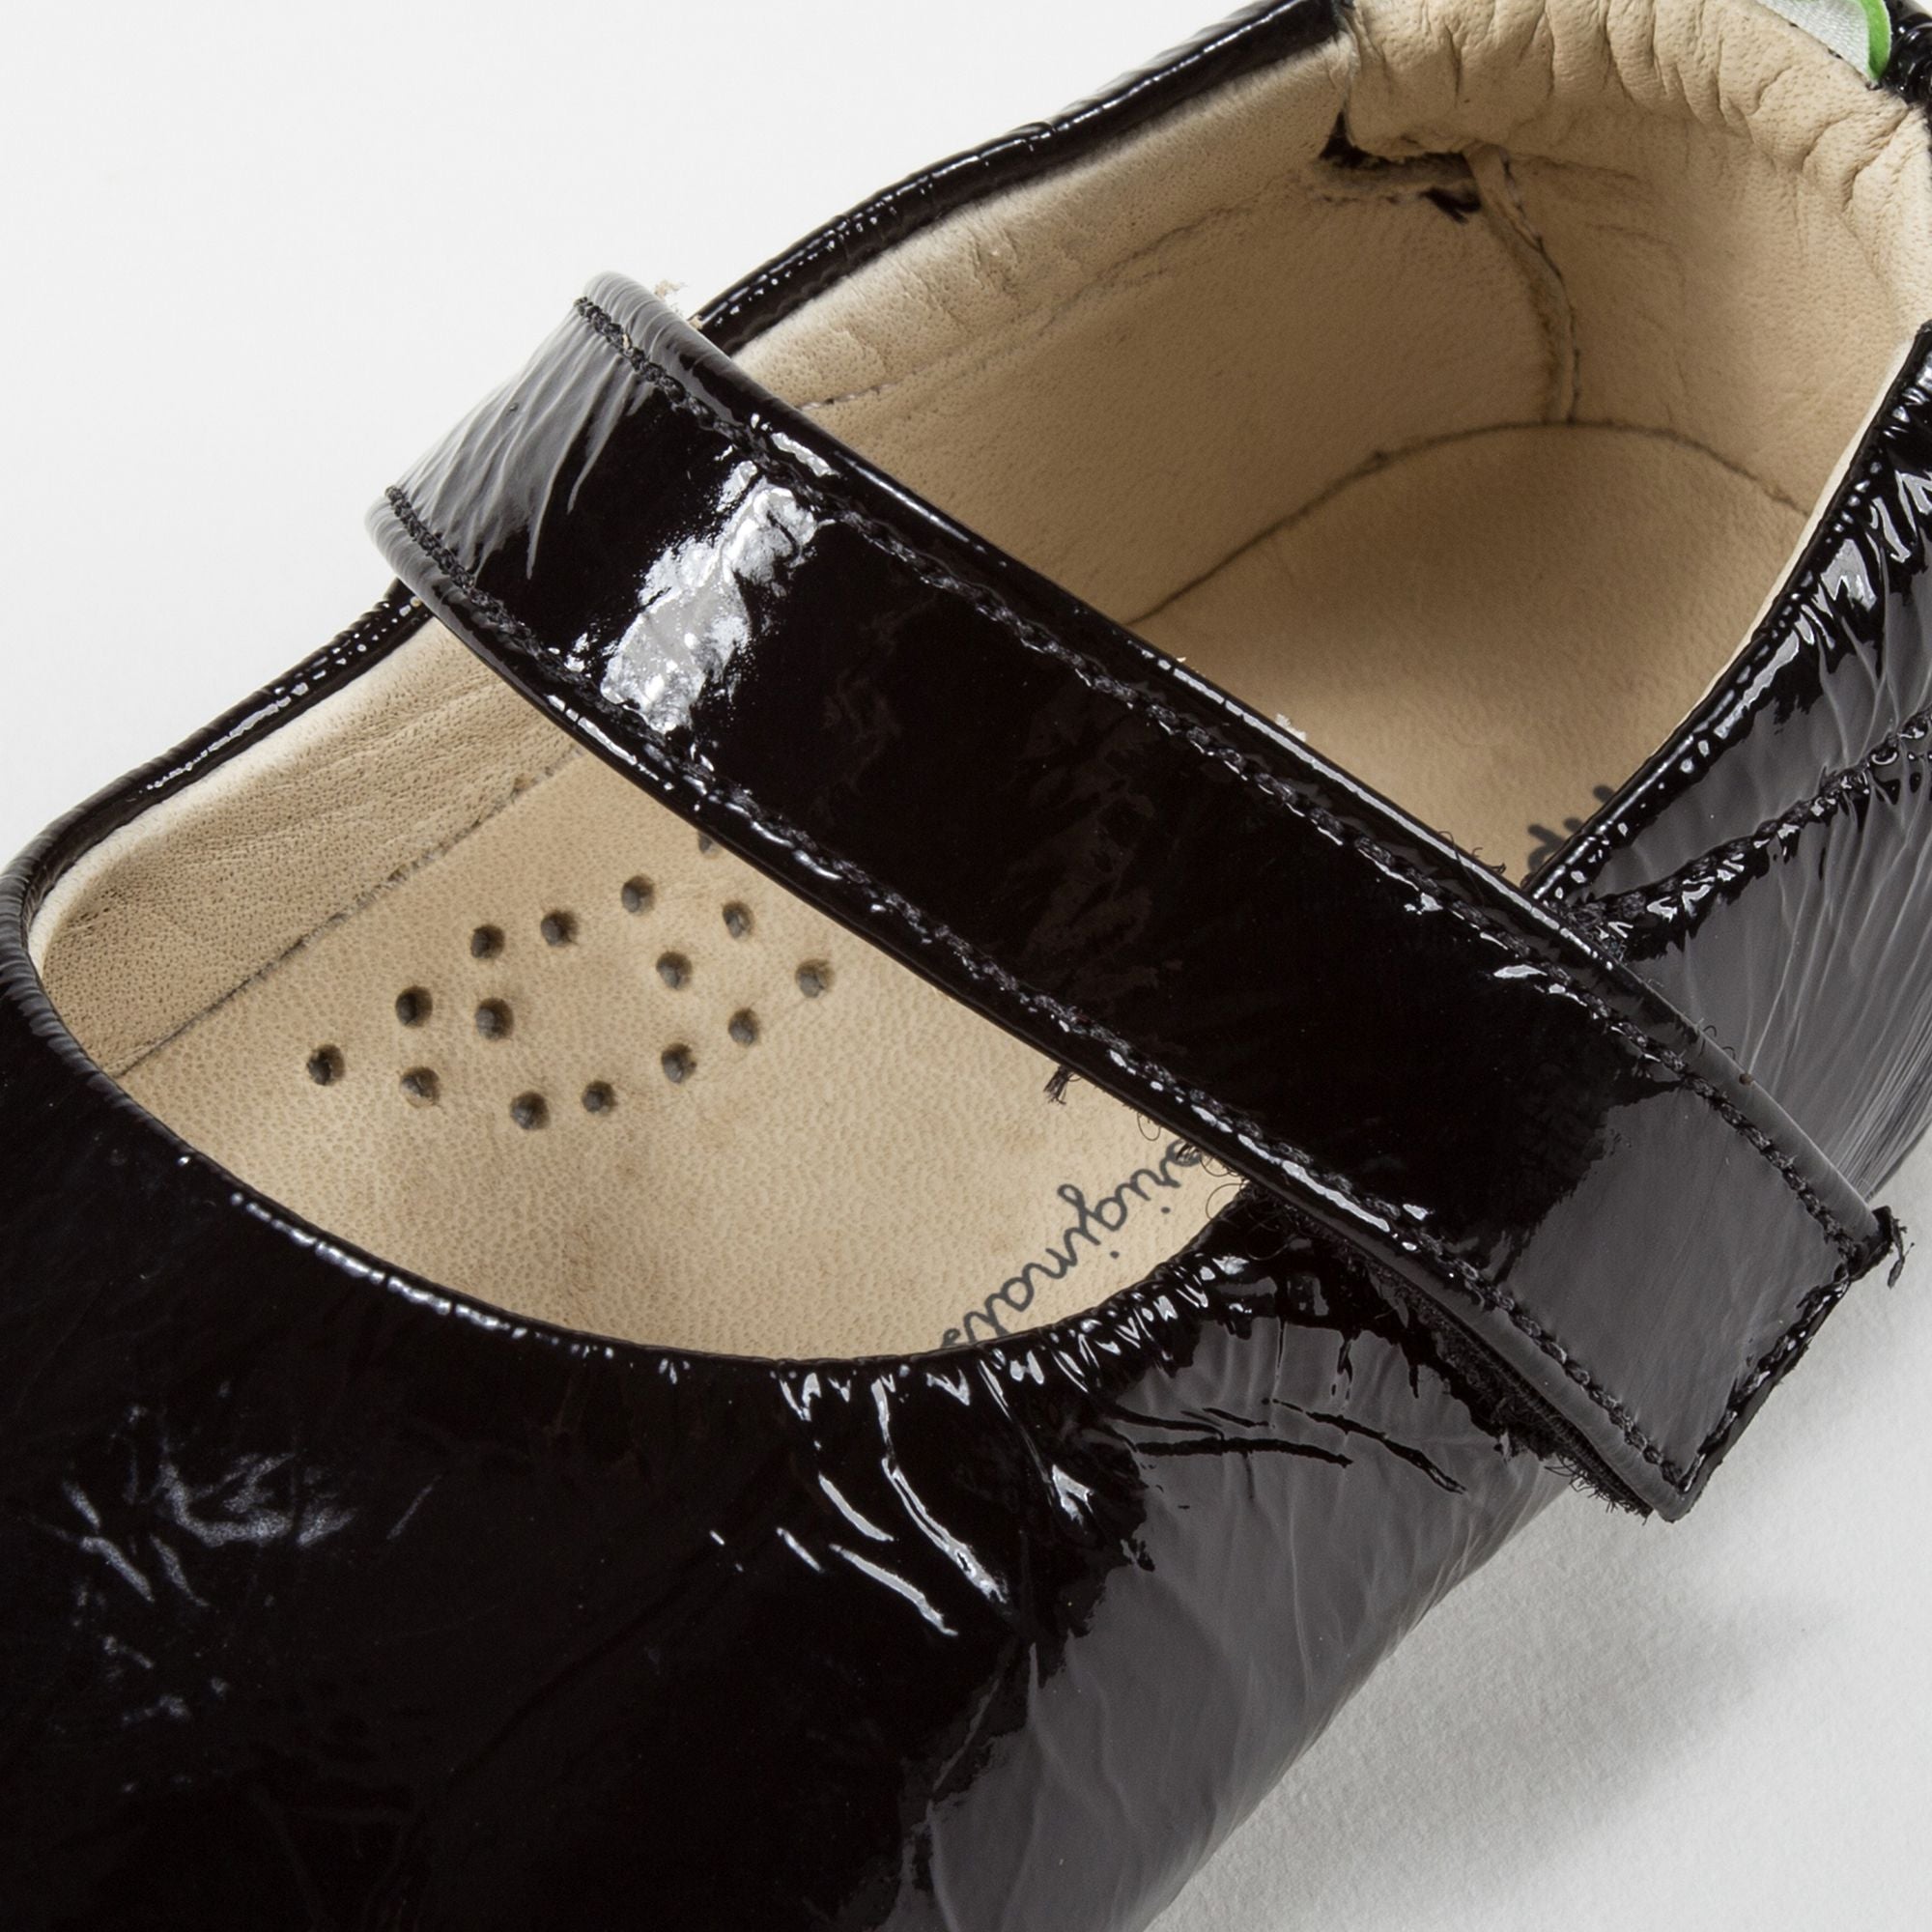 Baby Girls Patent Black Leather Shoes